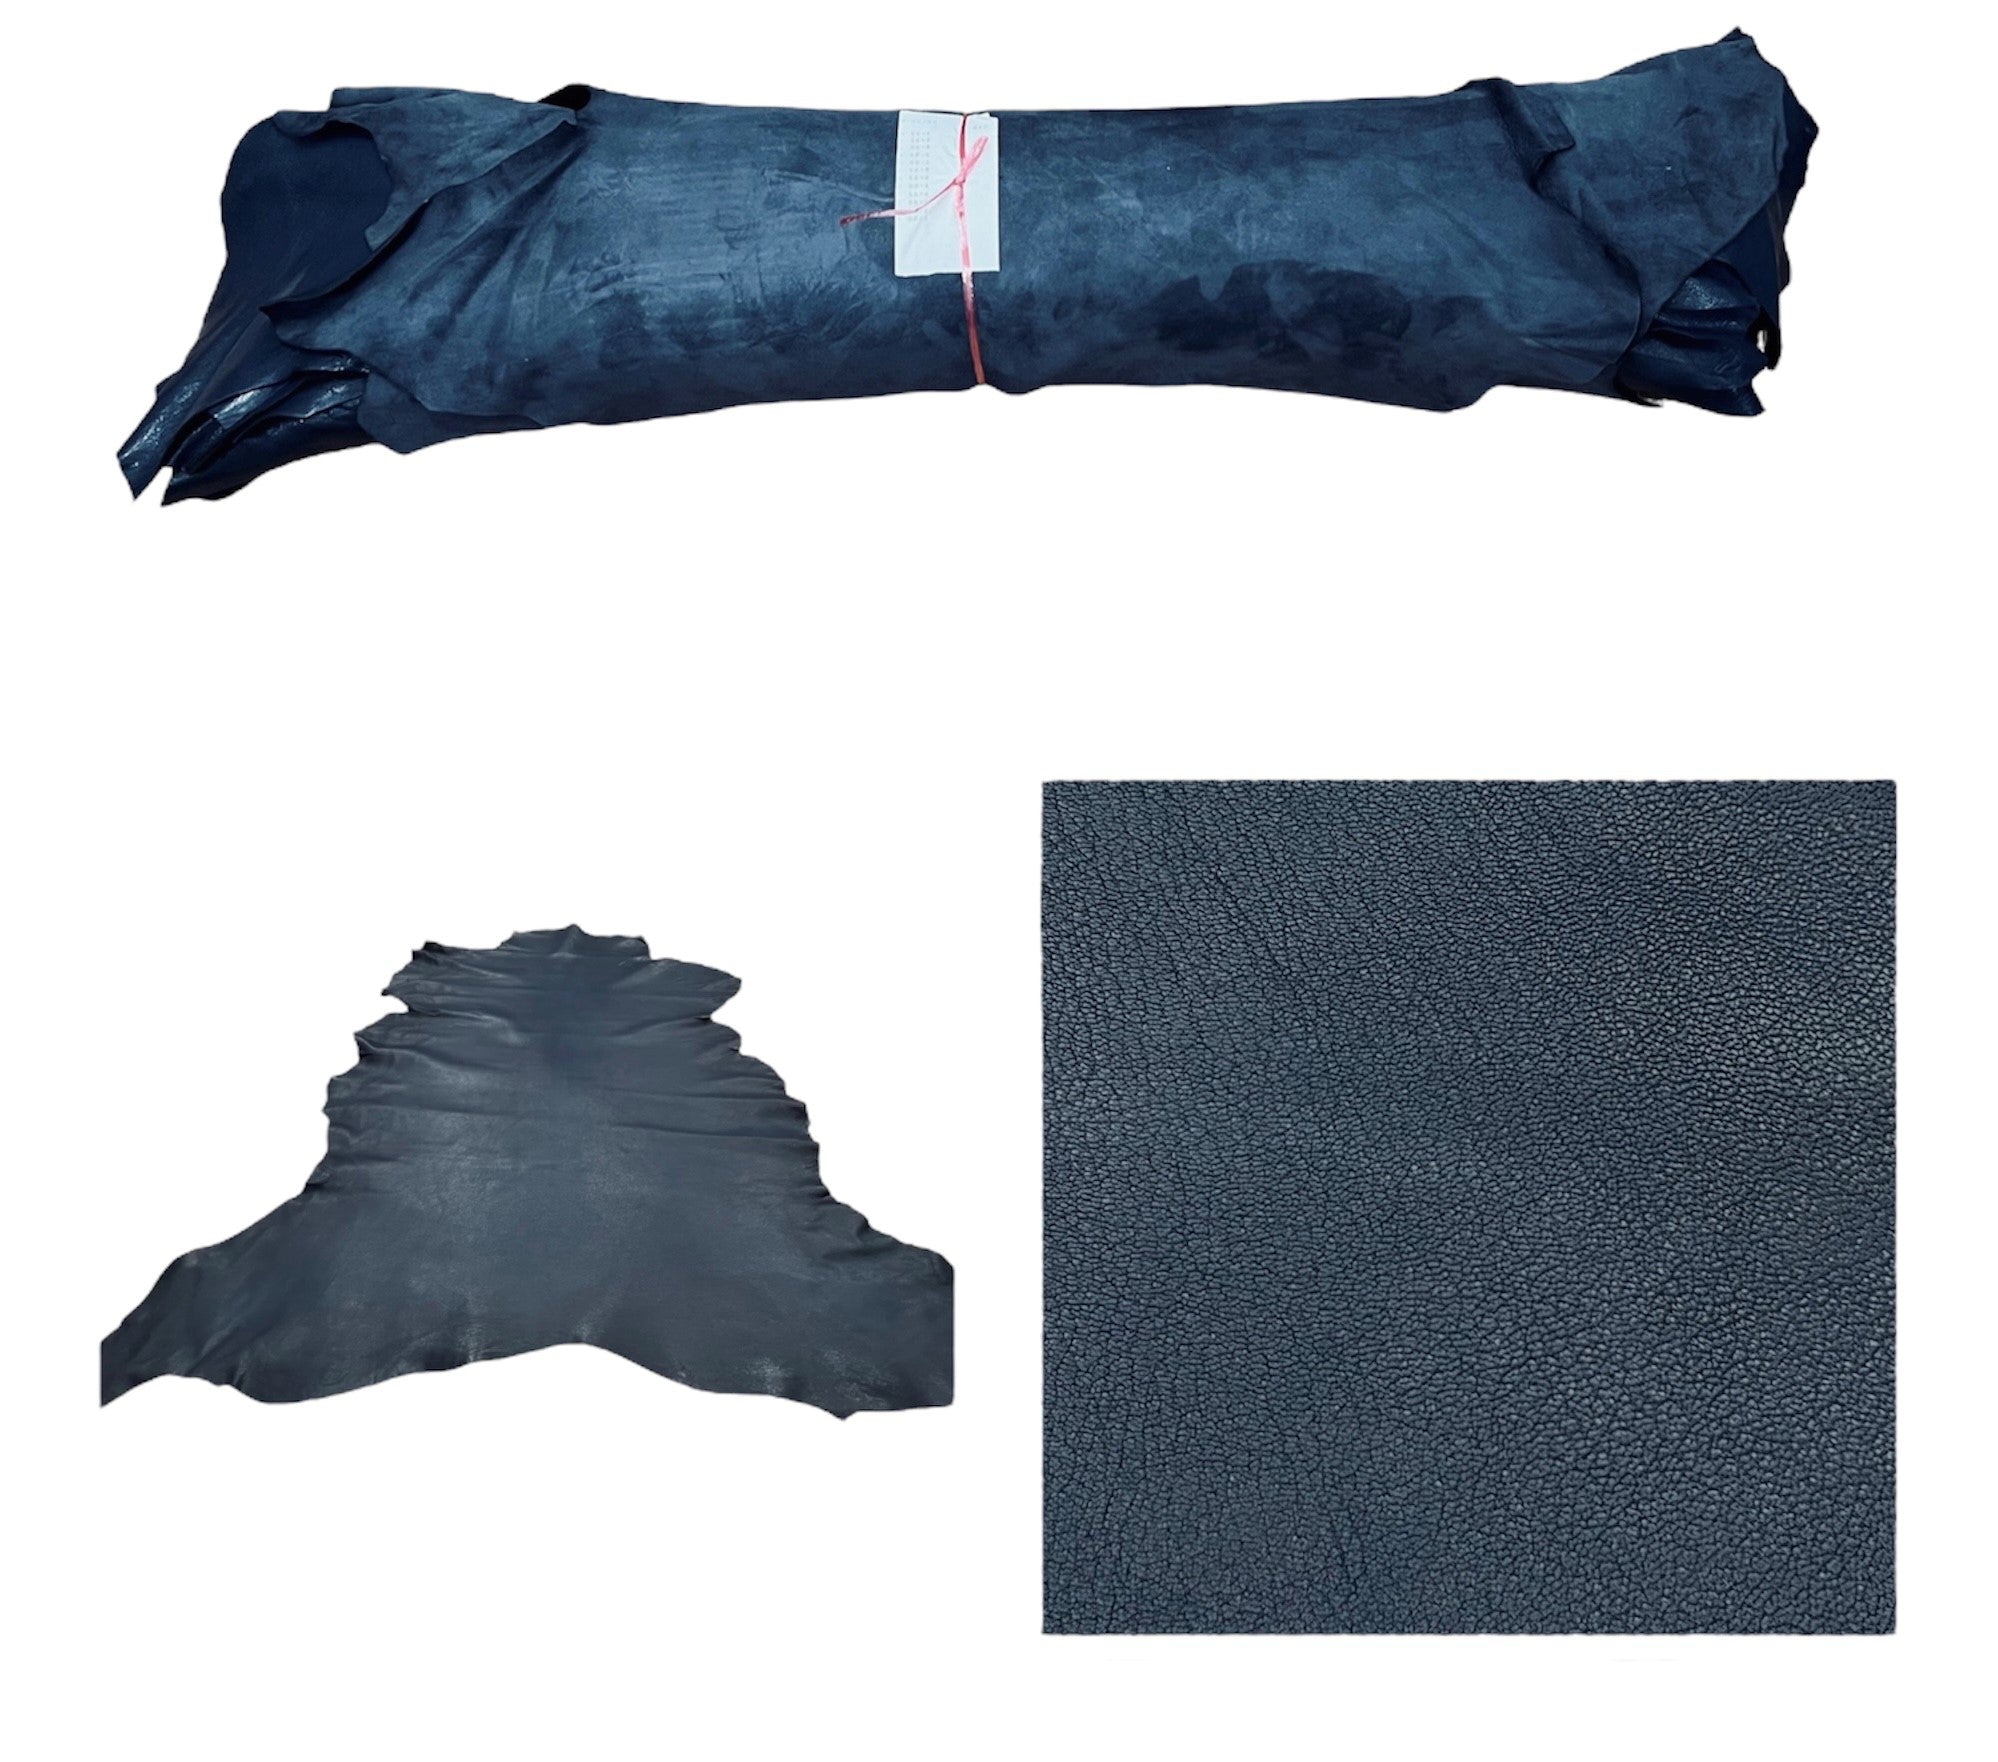 Navy, Pre Dyed : Vegetable Tanned Goat Skin : (1.0-1.2mm 3oz).